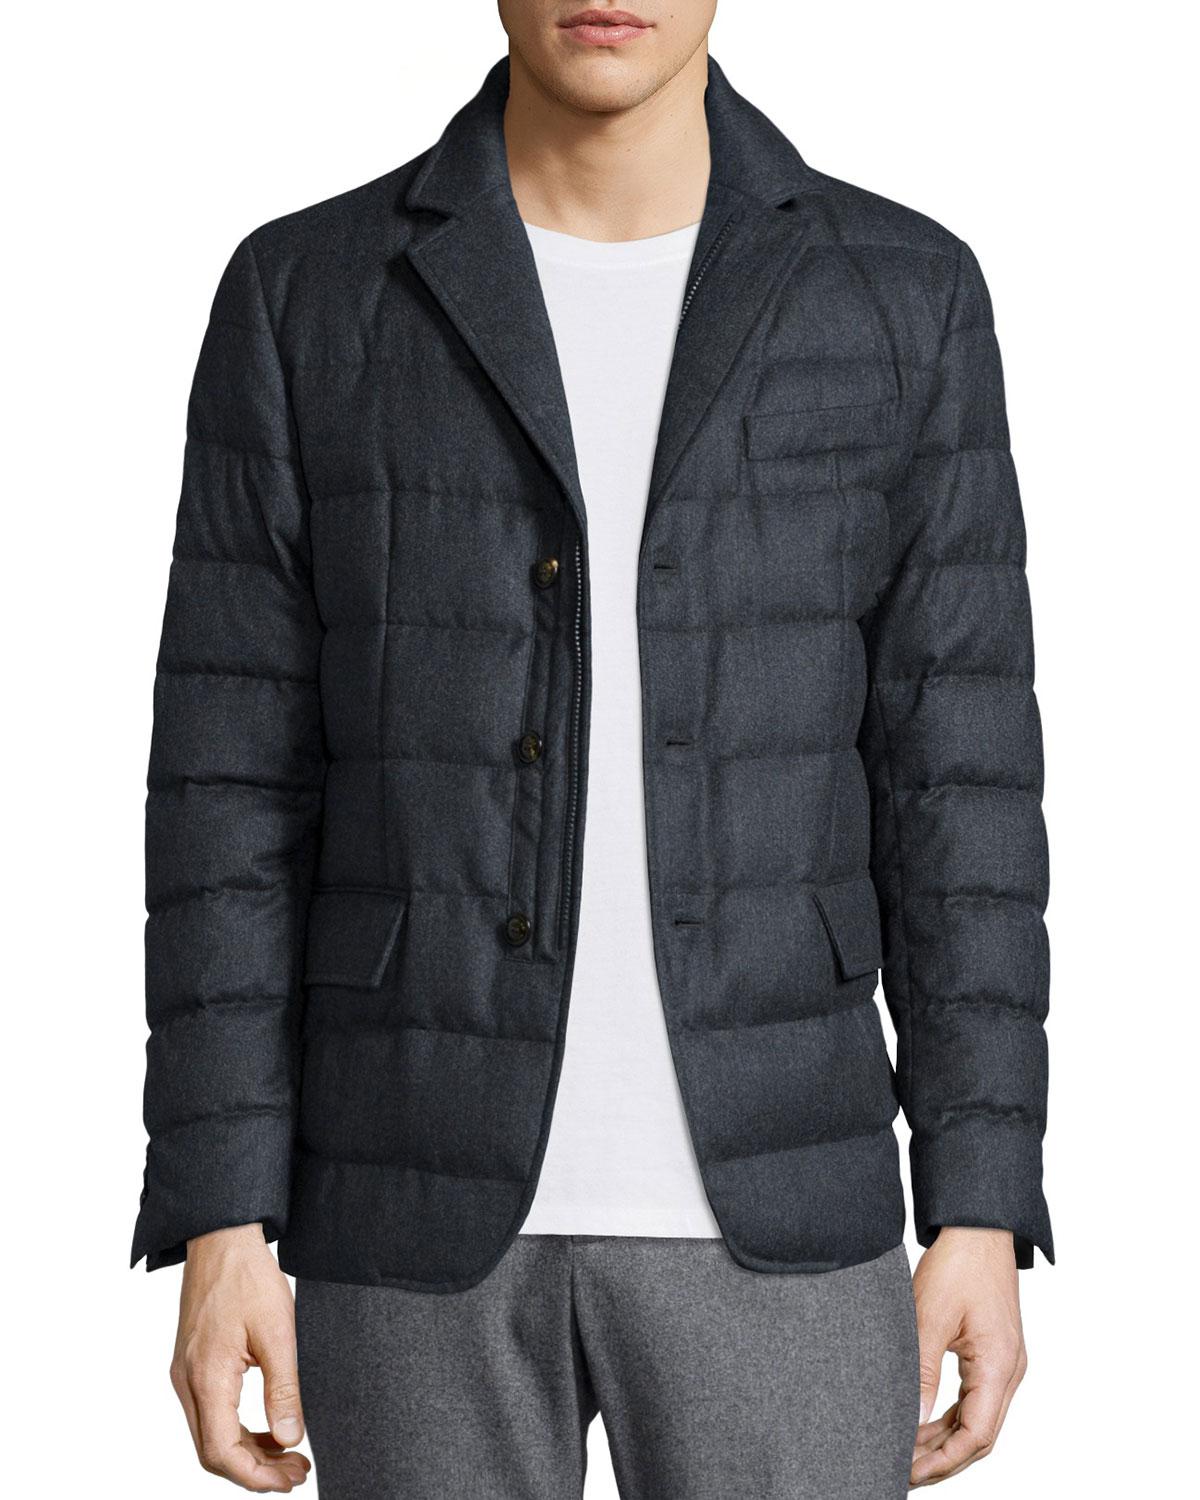 Moncler Goose Rodin Quilted Button-down Jacket in Navy (Blue) for Men - Lyst